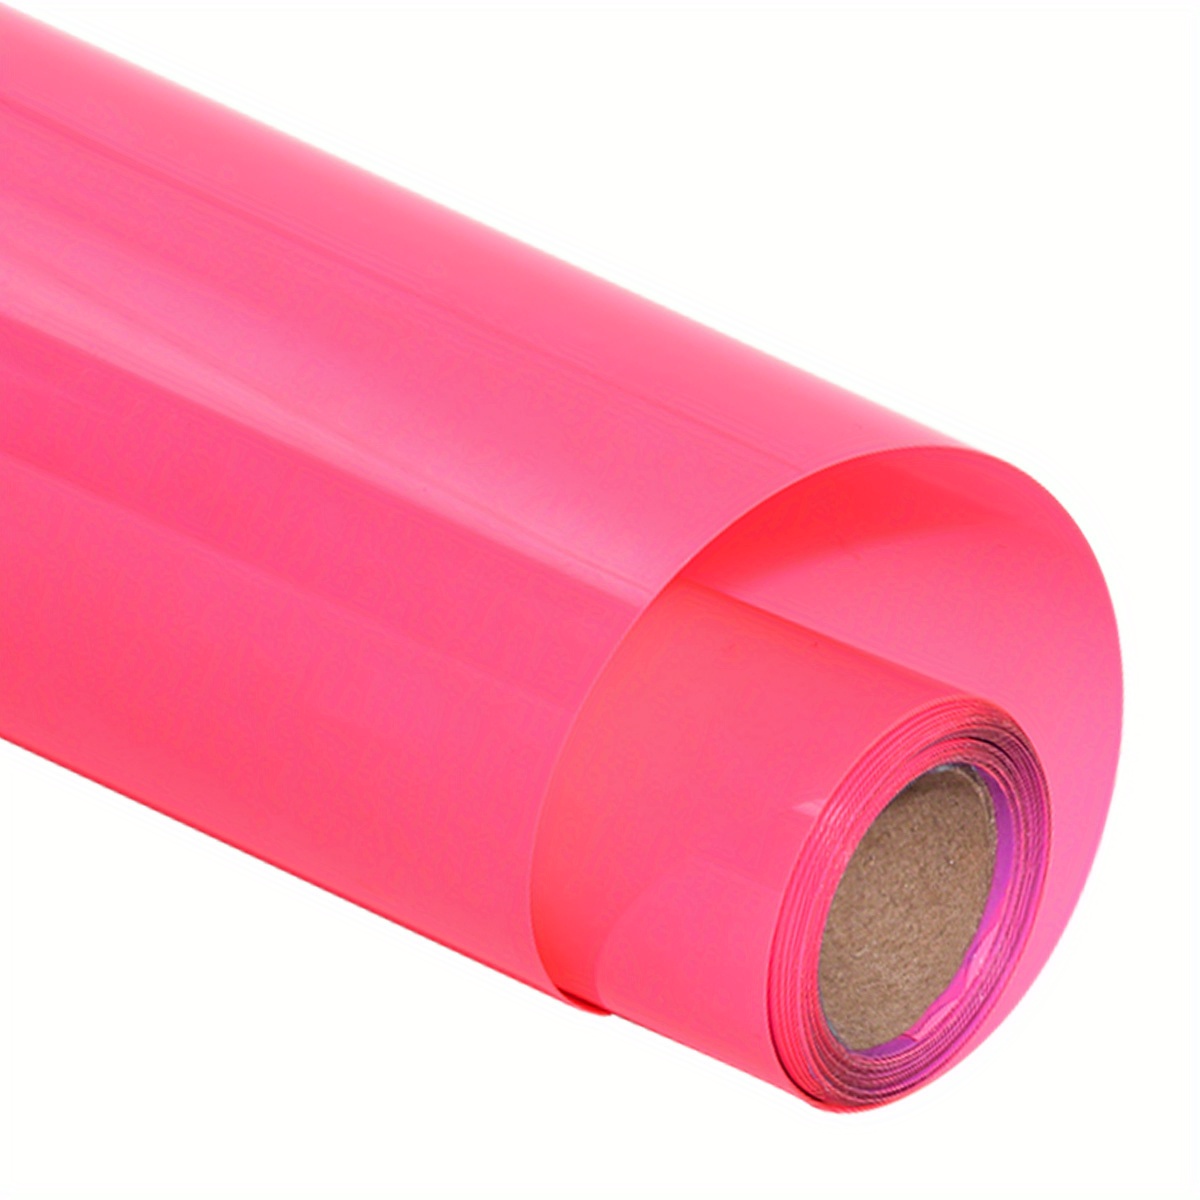 Neon Pink Iron On Vinyl - Heat Transfer Pack of Sheets